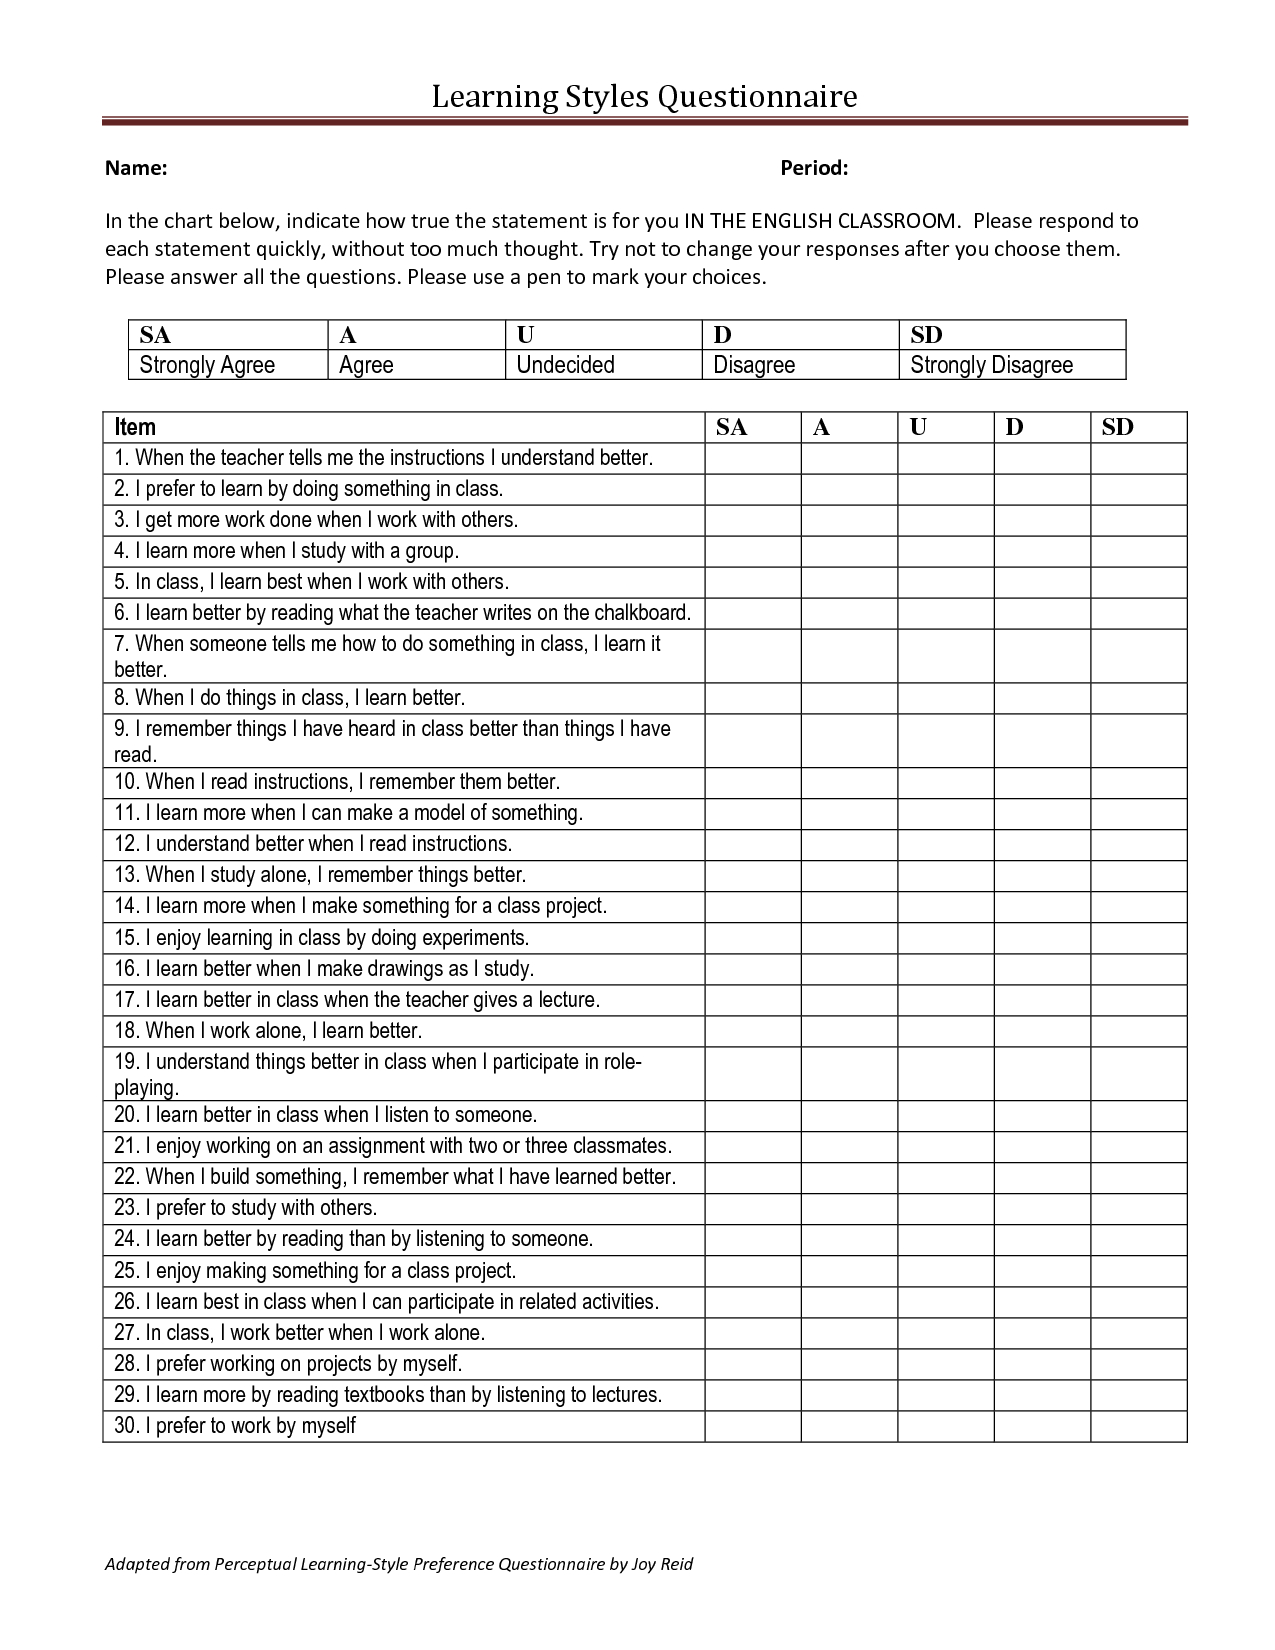 Learning Style Questionnaire | Back To School | Pinterest | Learning - Free Printable Learning Styles Questionnaire